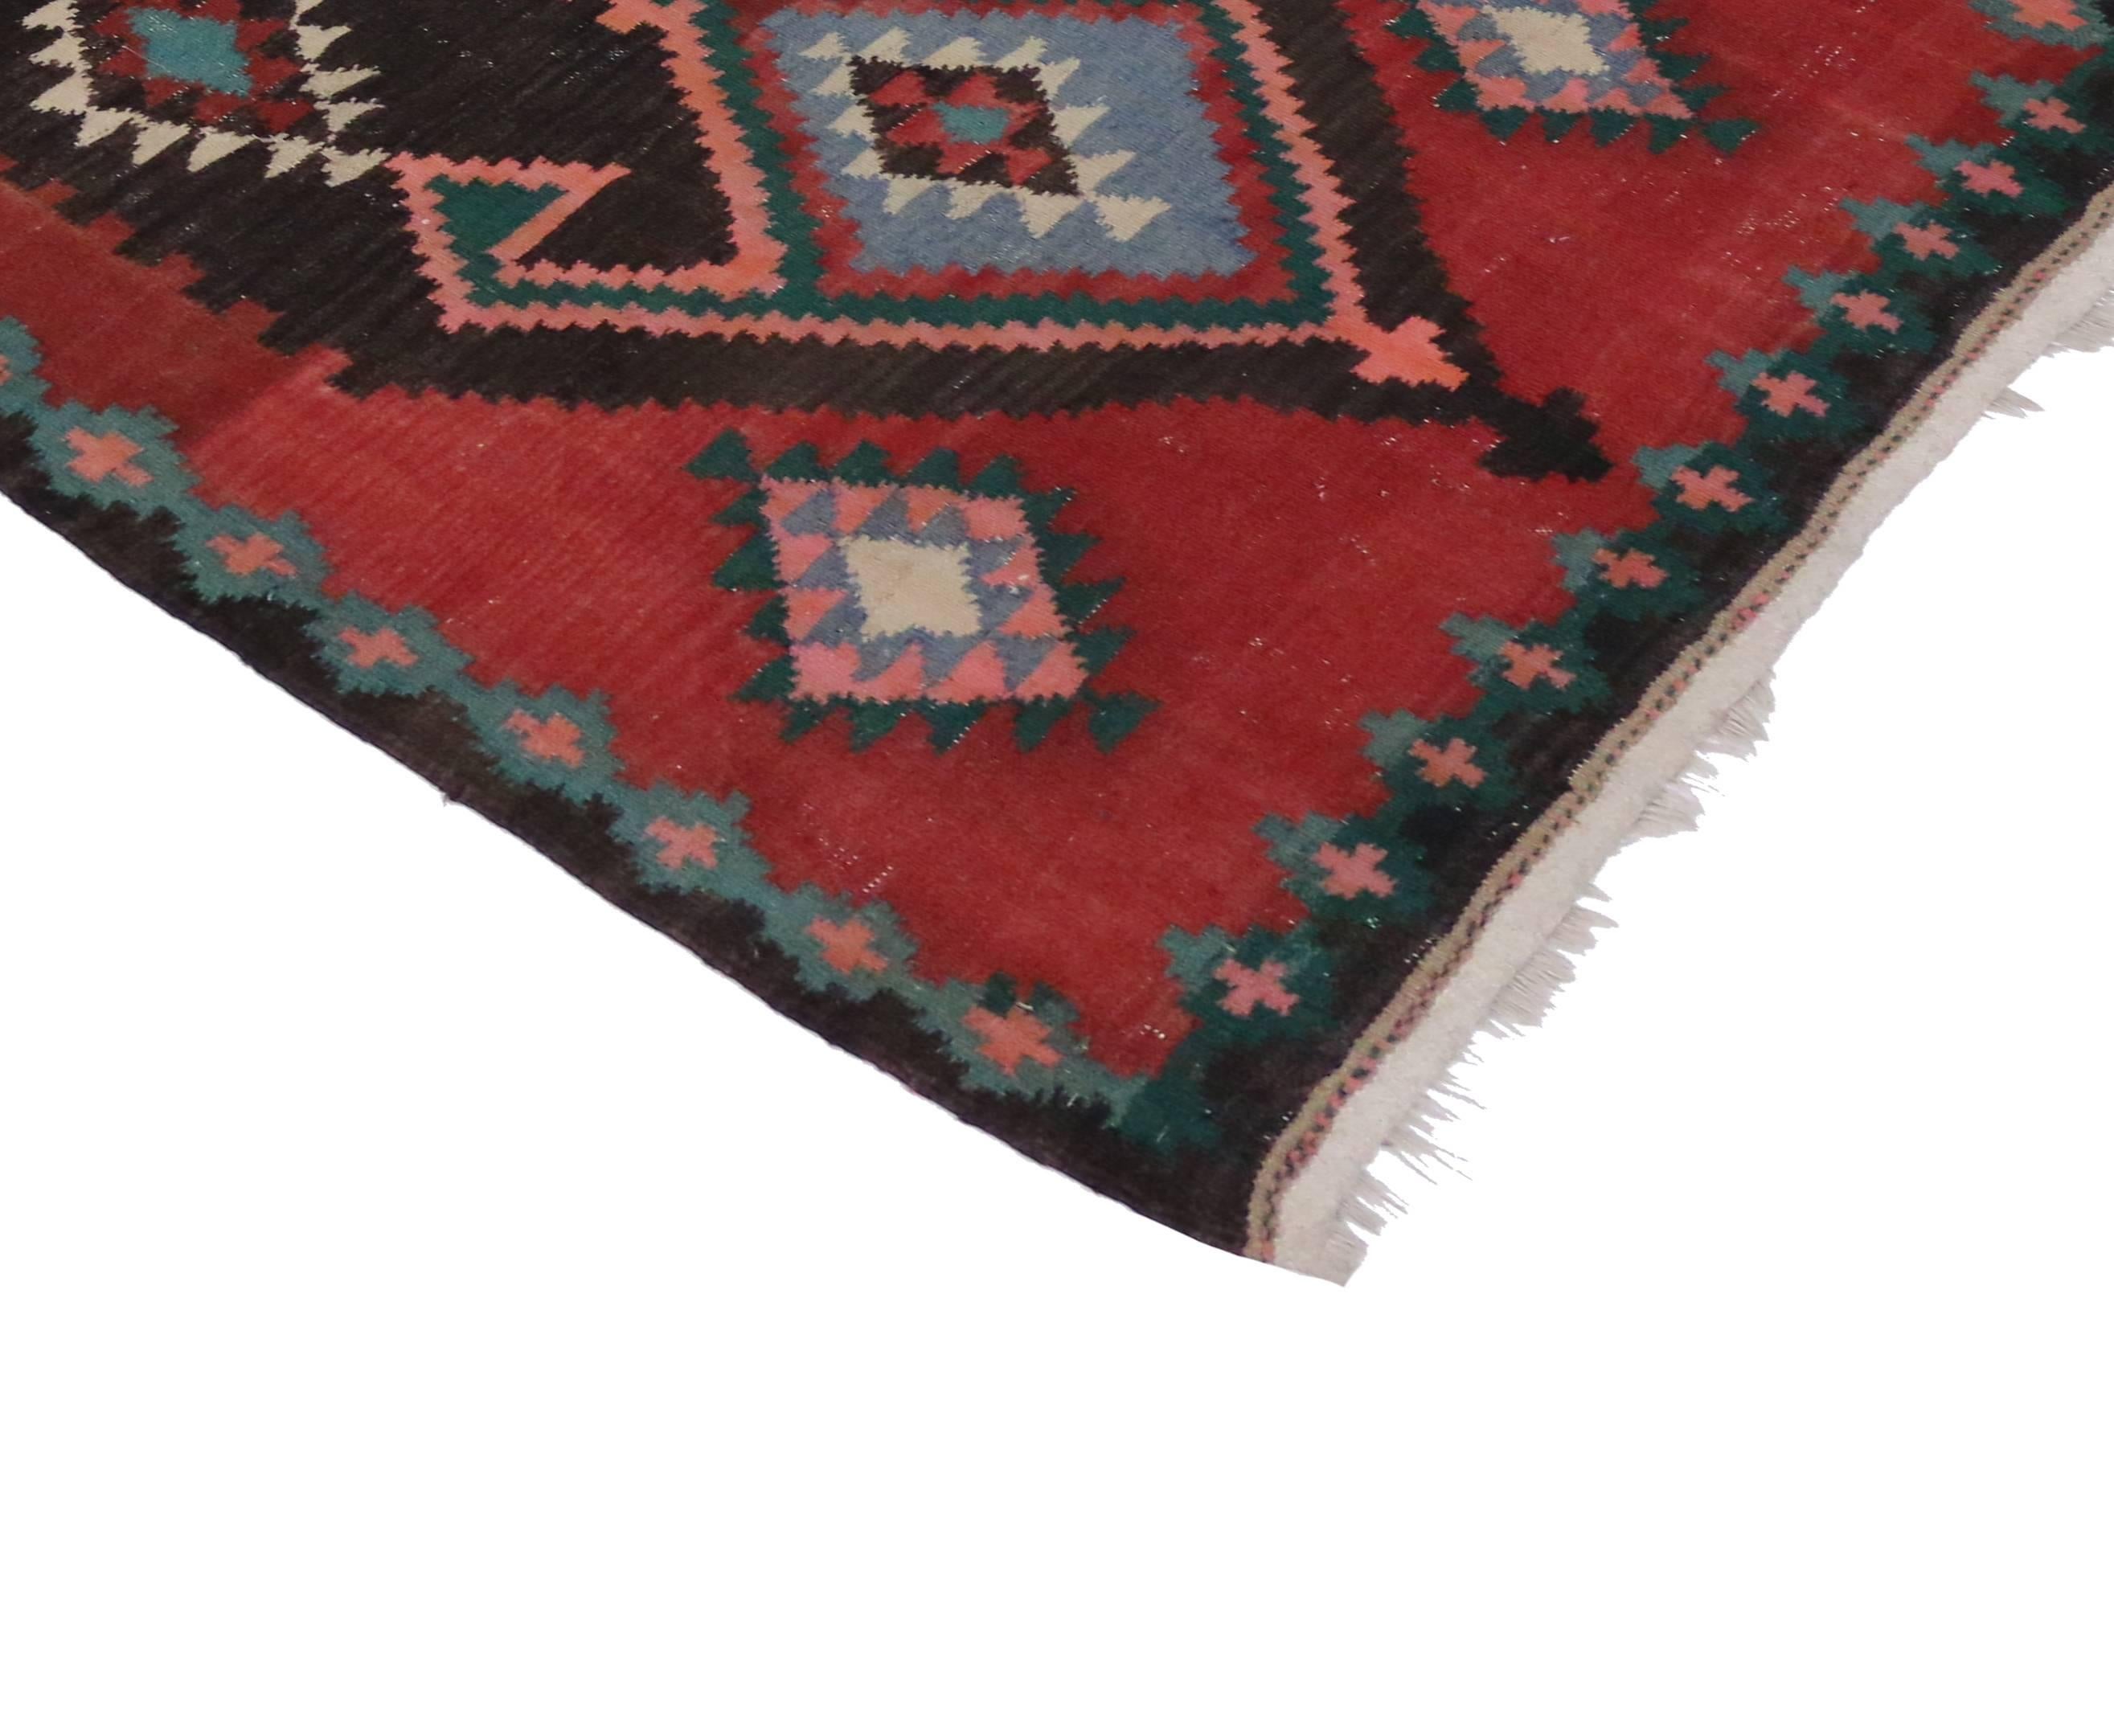 74900, vintage Persian tribal Kilim rug with modern style, Kilim runner. Create a comfortable and modern setting with this vintage handwoven kilim with tribal style. Handwoven wool vintage Persian Tribal Kilim rug highlighting the finest trends in